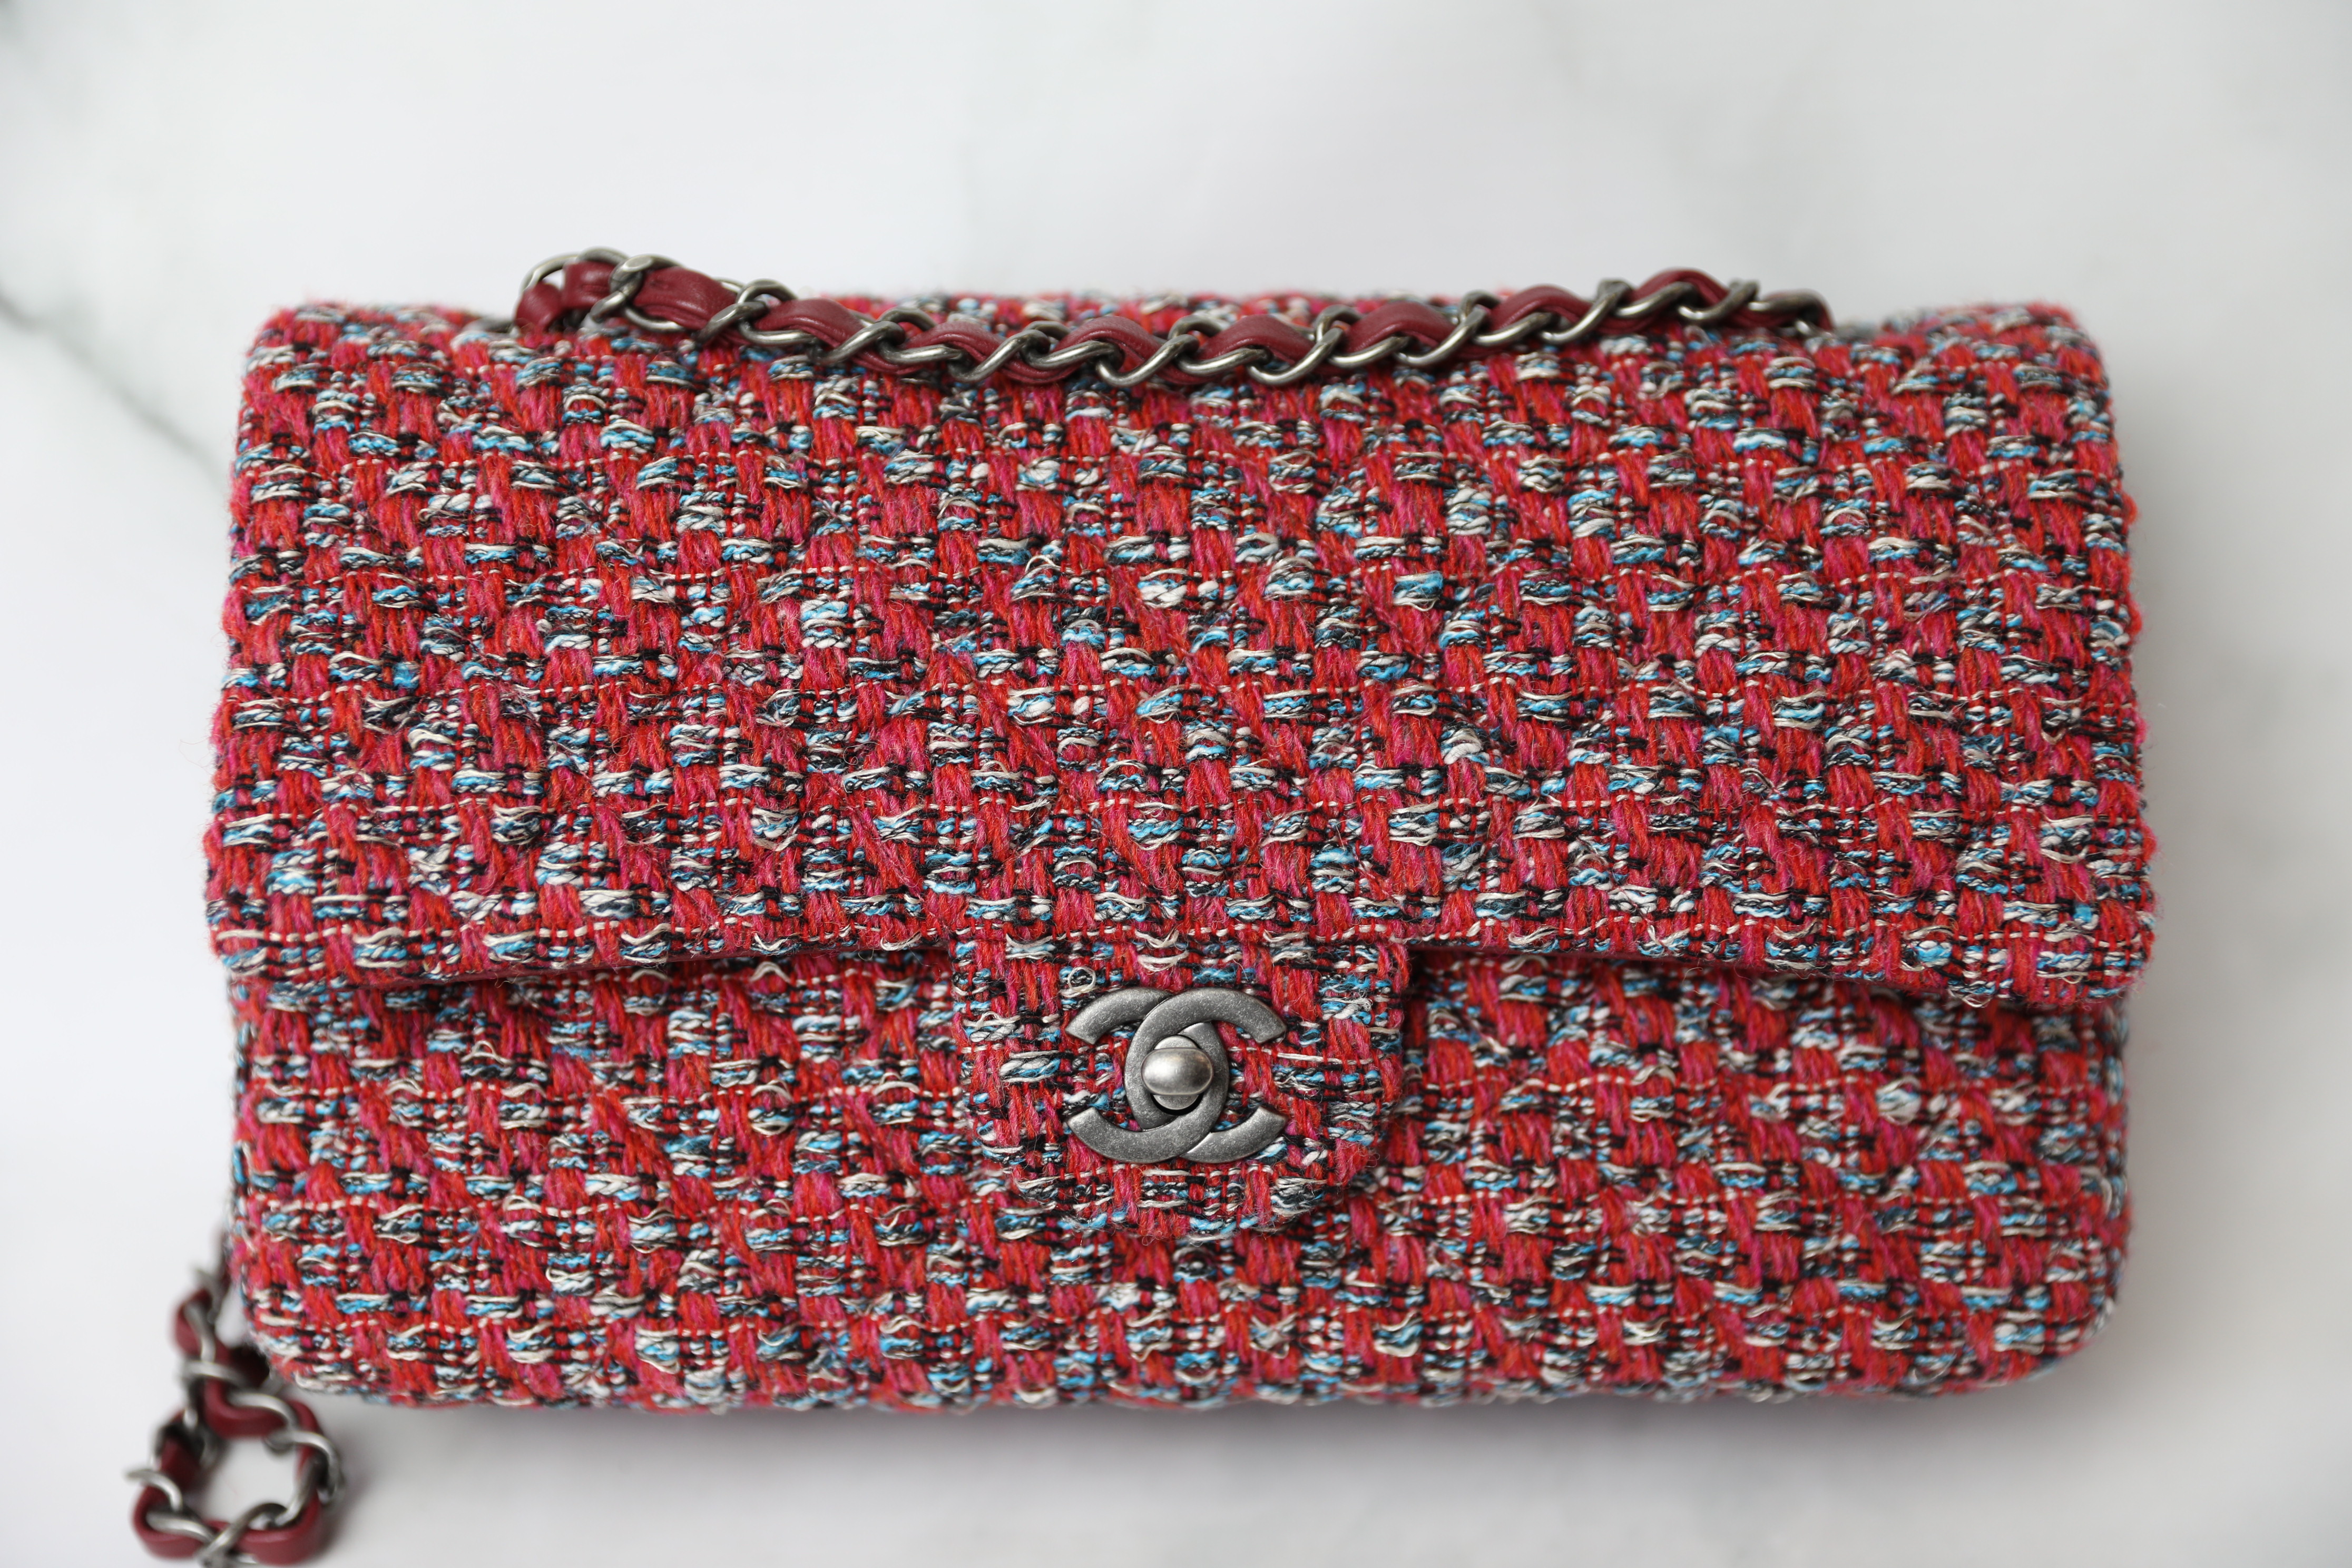 Chanel Classic Medium, Red Multicolor Tweed with Ruthenium Hardware,  Preowned in Box WA001